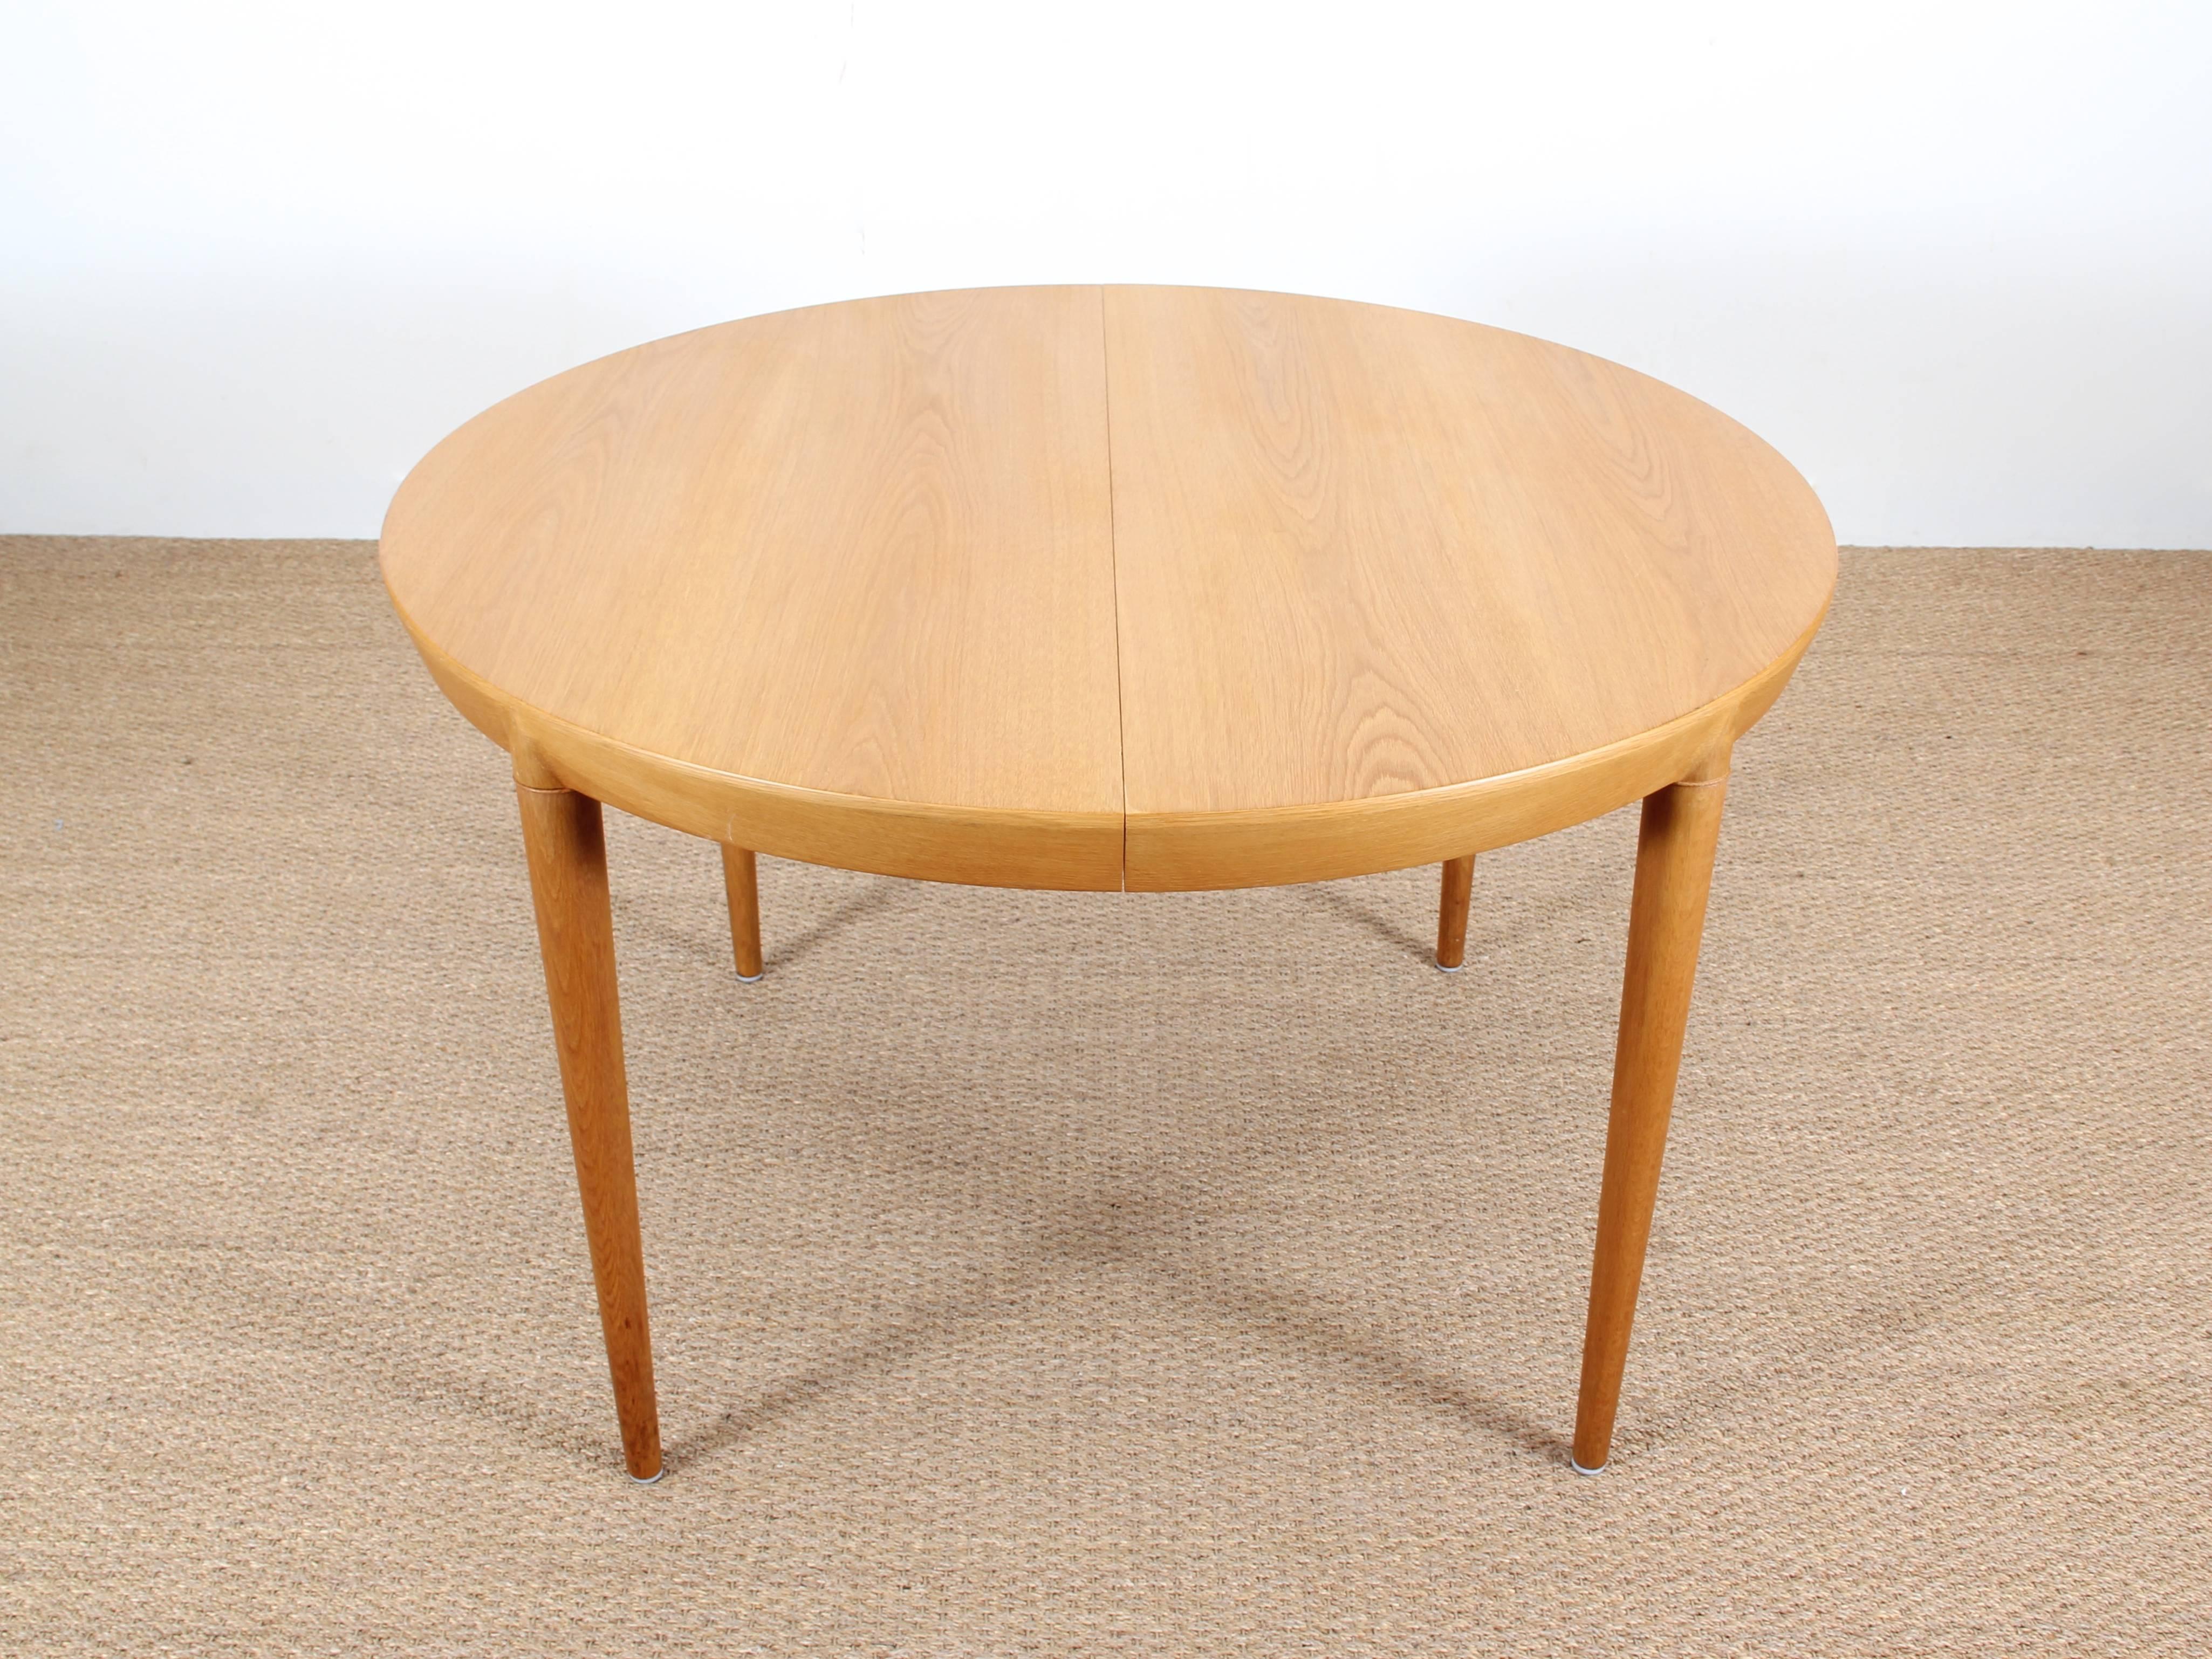 Mid-Century modern round dining table in oak by Erik Riisager-Hansen four/ten seats. Two extra leaves.

Dimensions:
Ø 117 cm, H 74 cm, W max 217 cm.